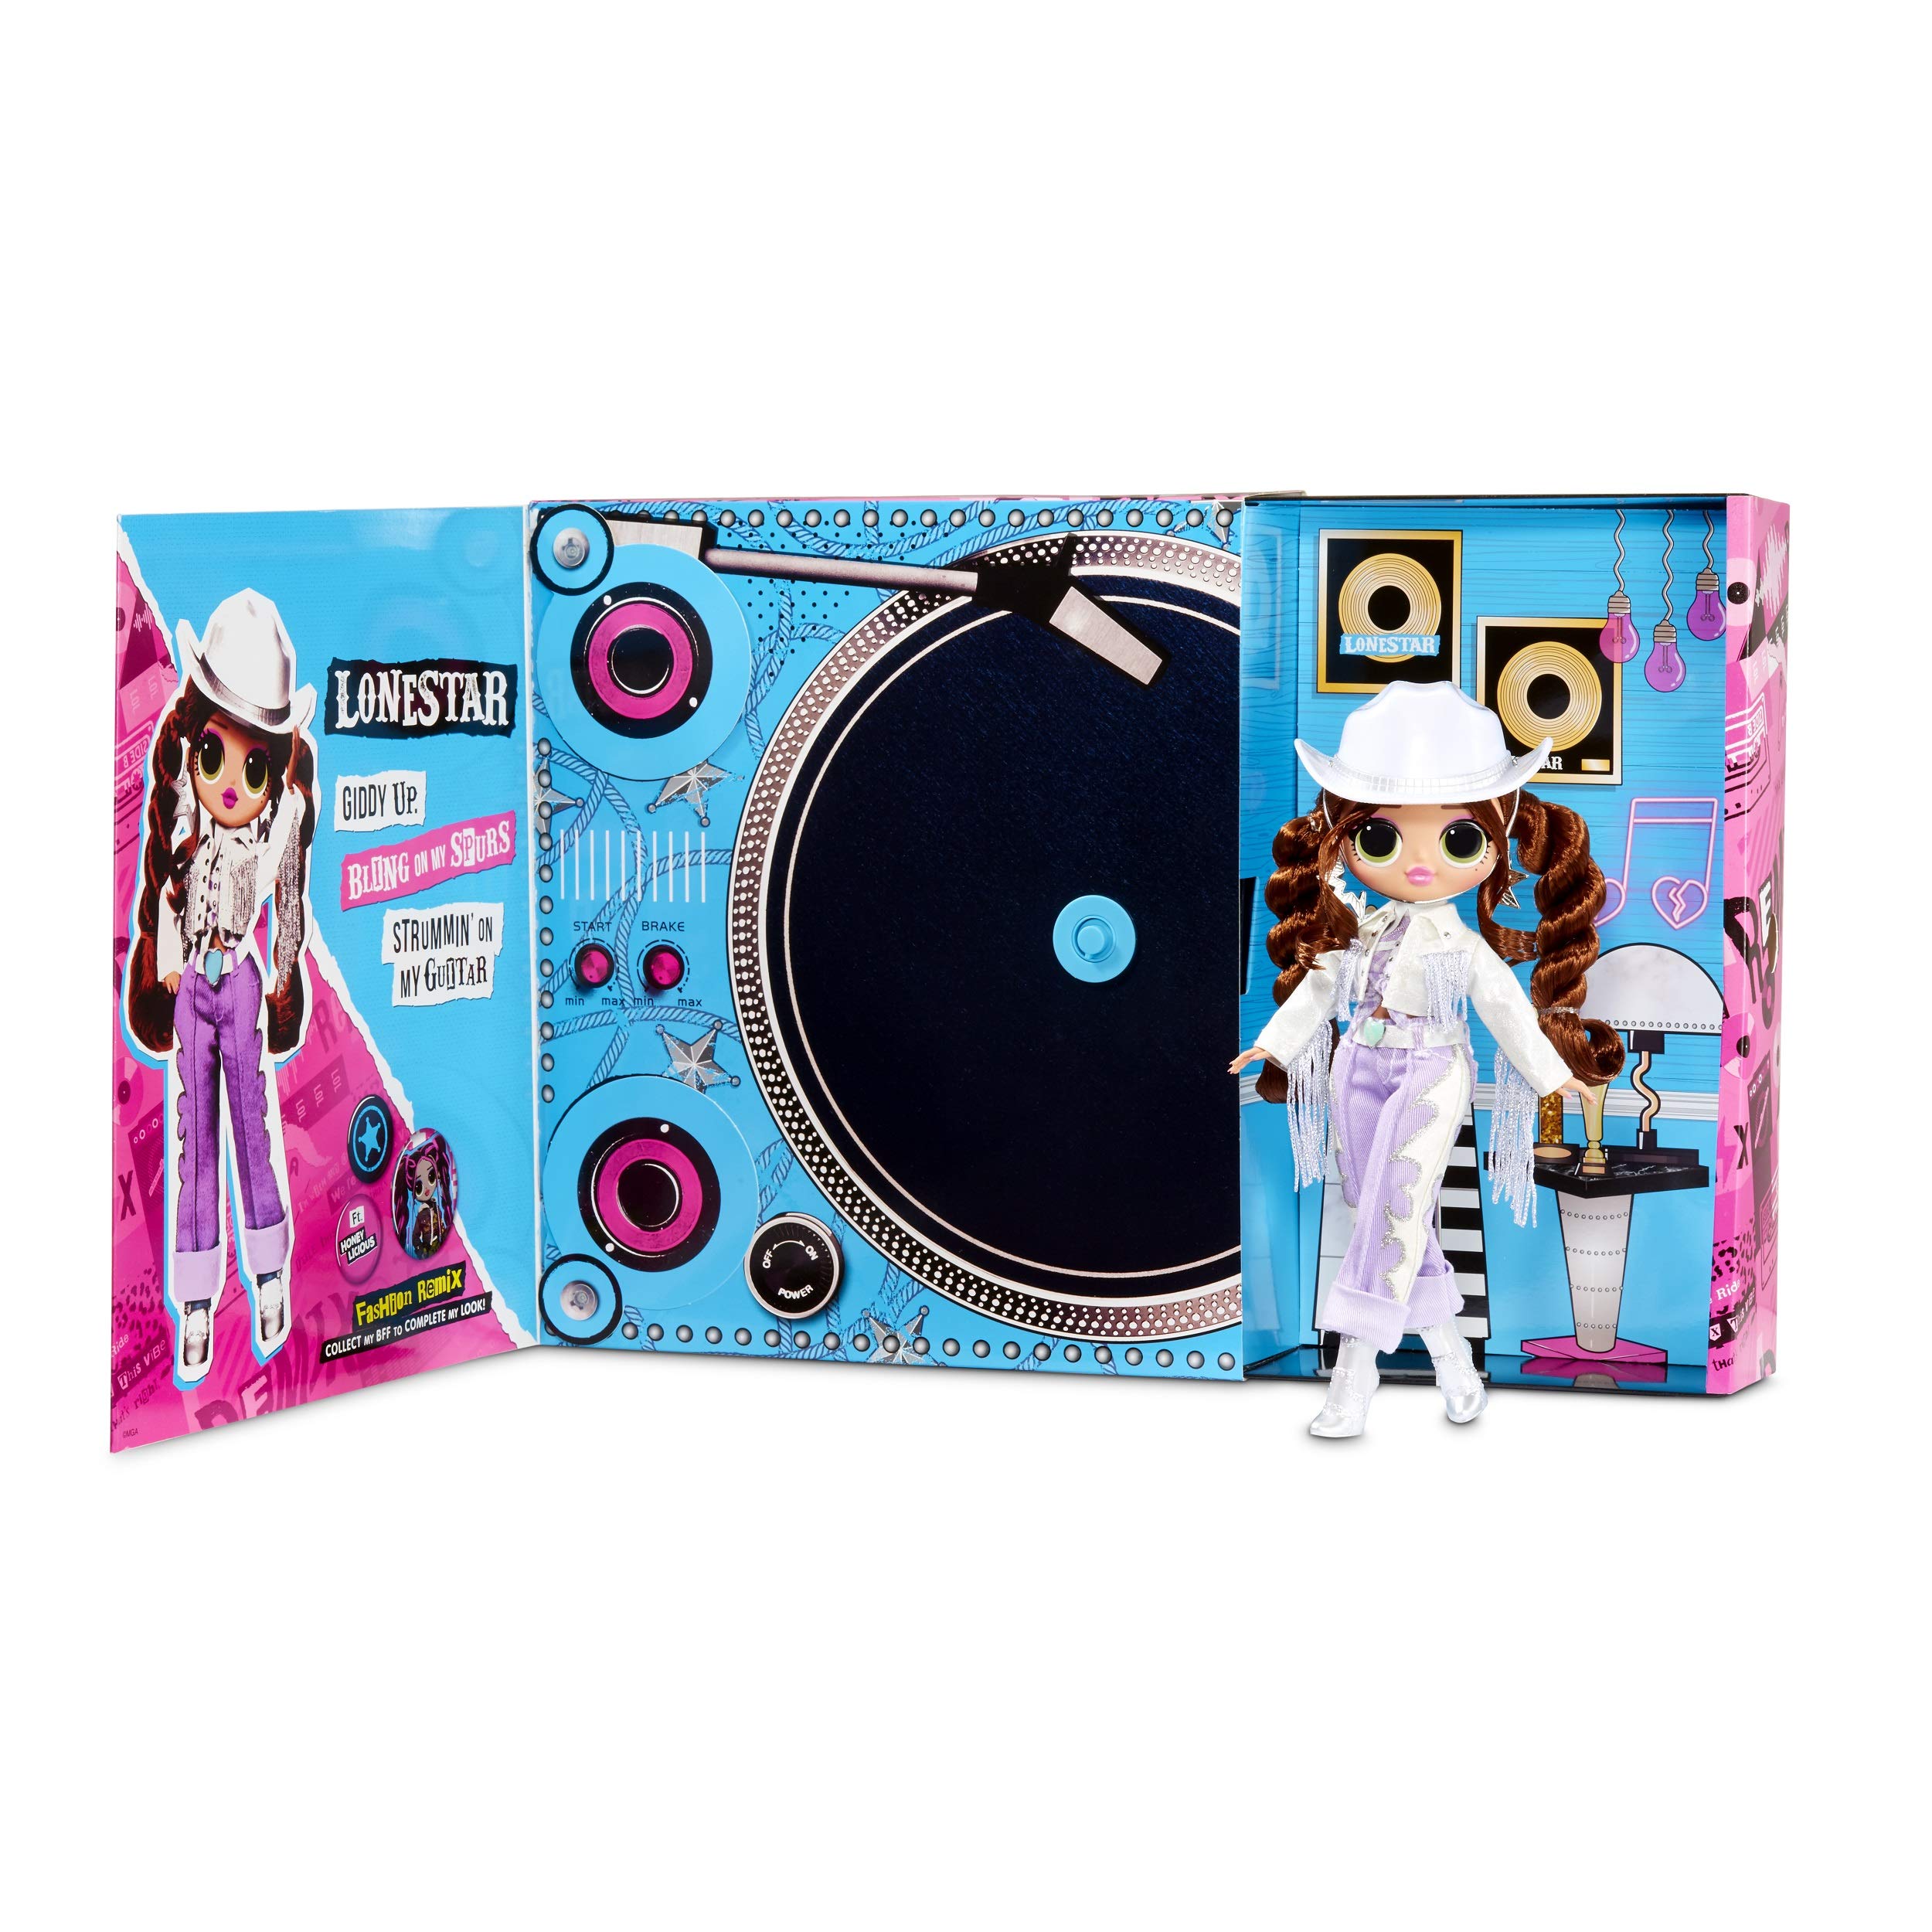 LOL Surprise OMG Remix Lonestar Fashion Doll, Plays Music with Extra Outfit, 25 Surprises Including Shoes, Hair Brush, Doll Stand, Magazine, and Record Player Package - for Girls Ages 4+